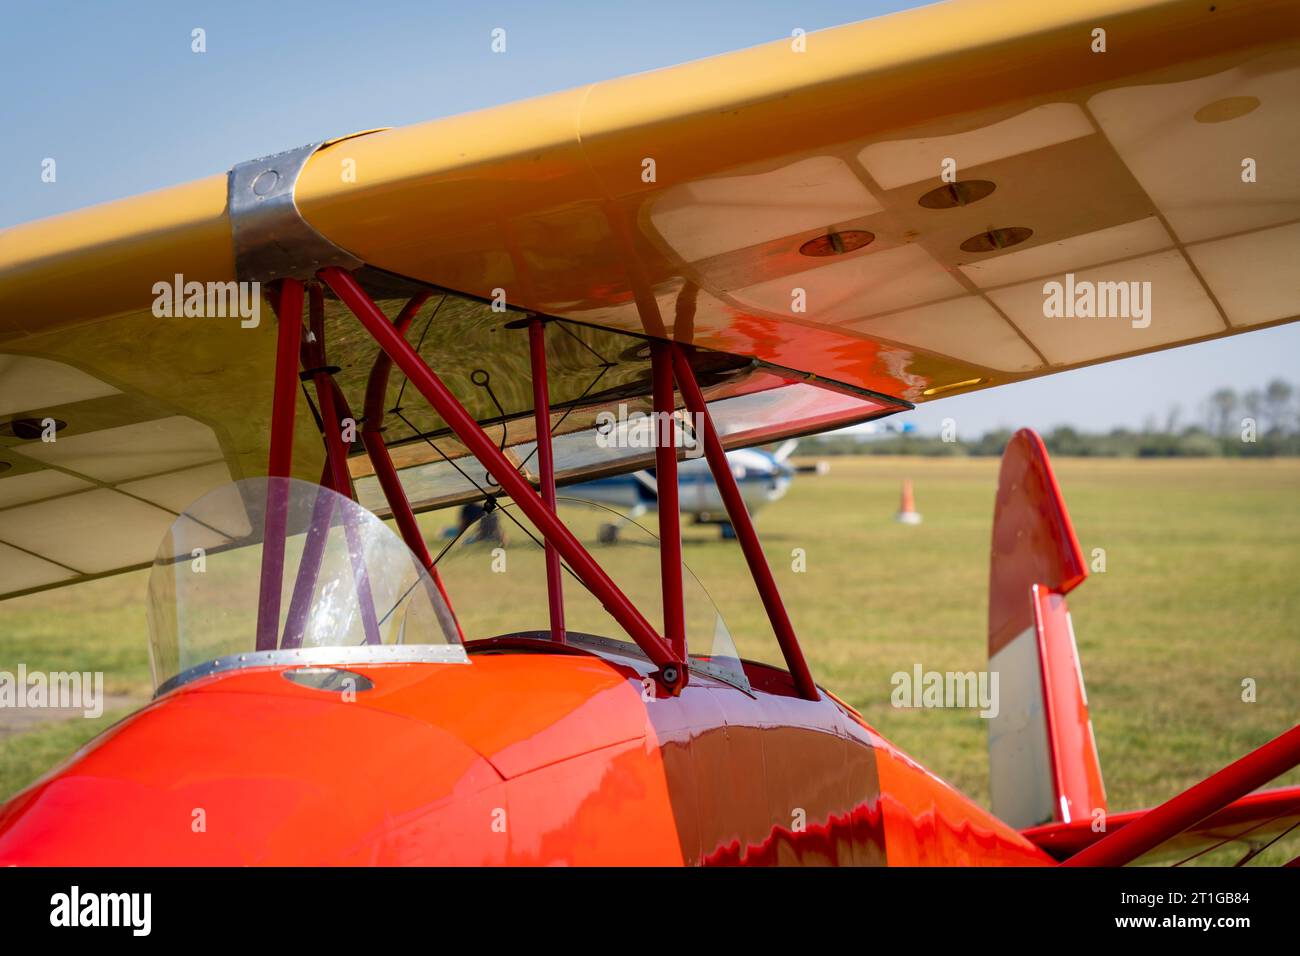 Red painted glider on a grassy airfield Stock Photo